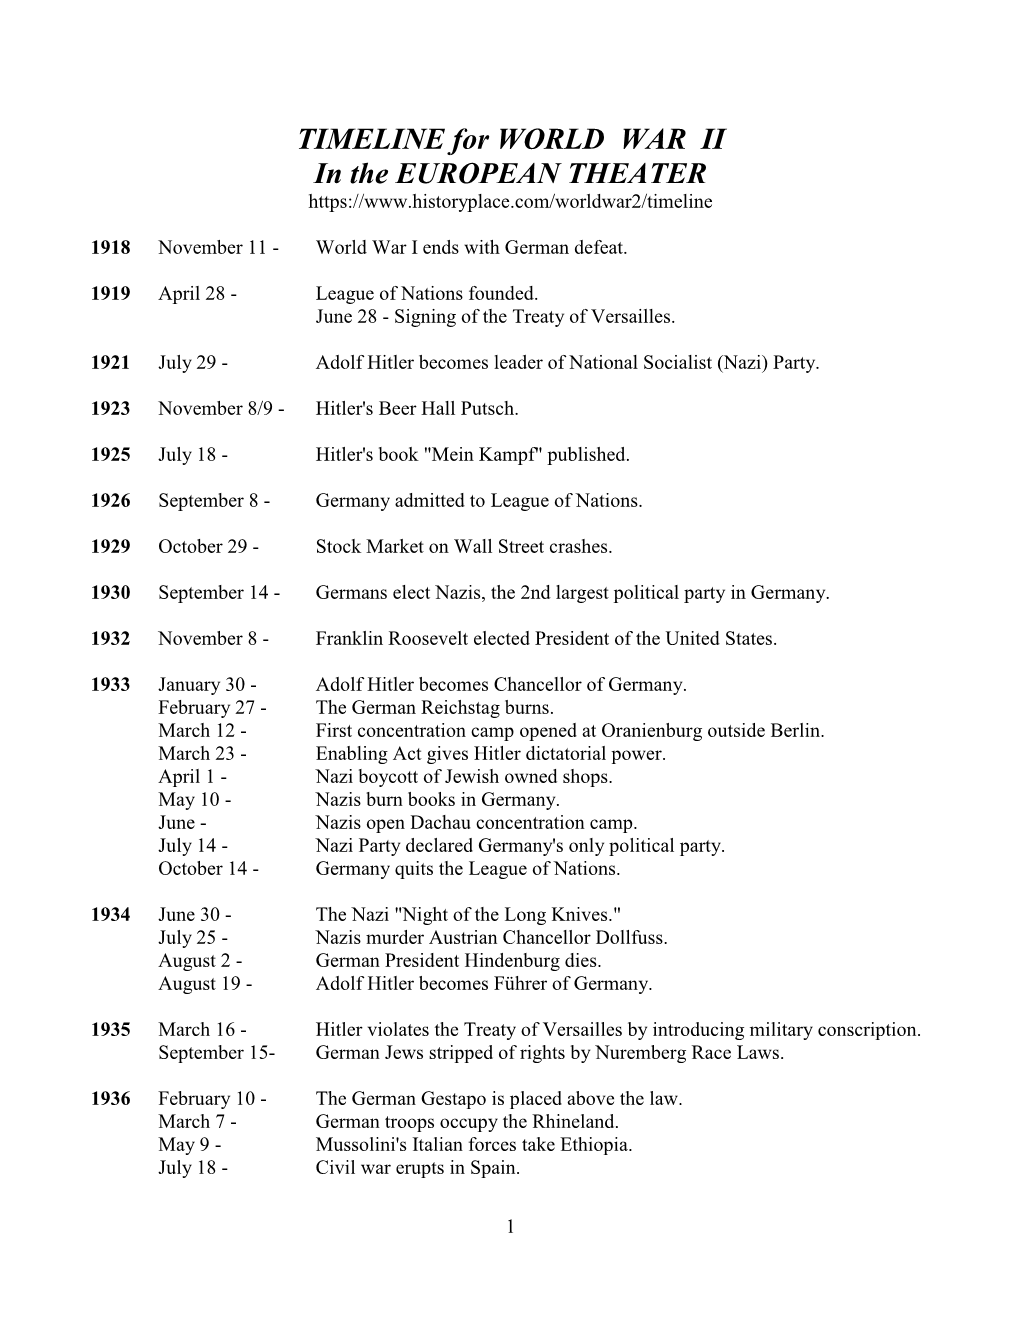 TIMELINE for WORLD WAR II in the EUROPEAN THEATER